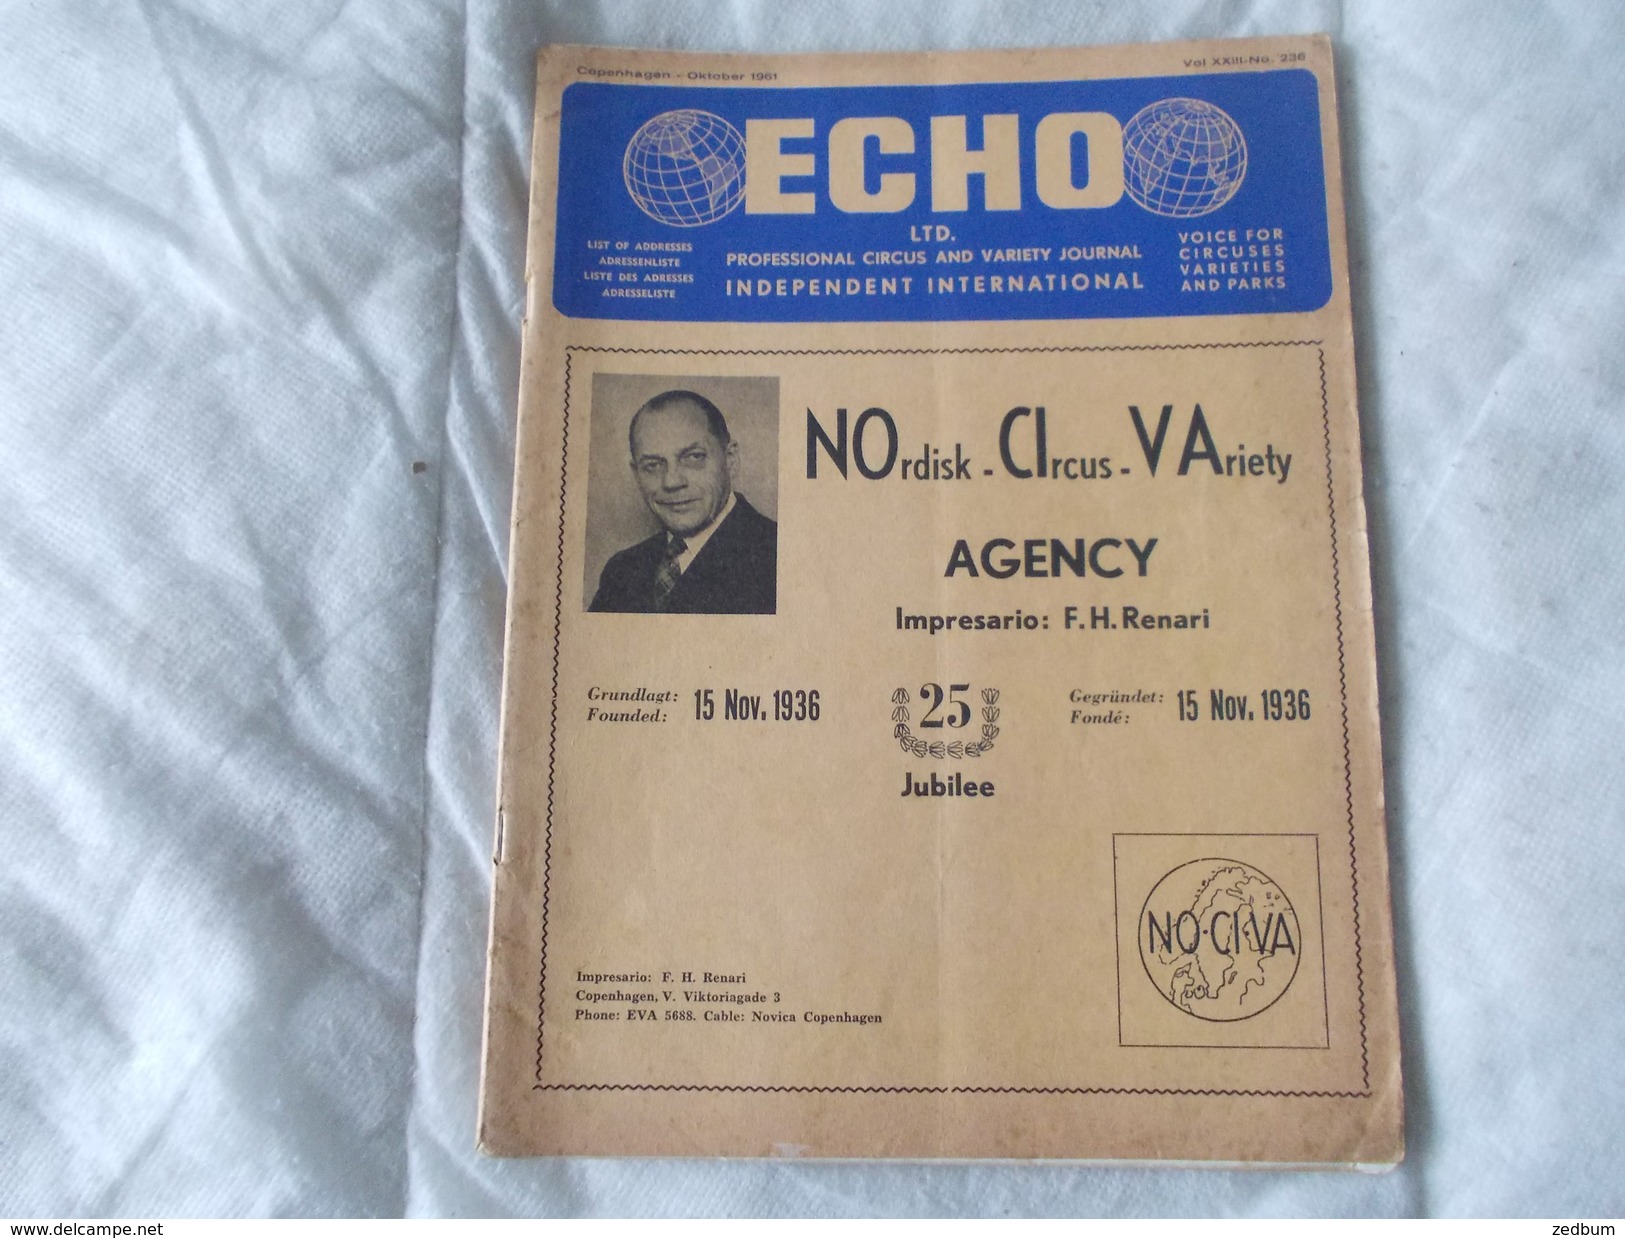 ECHO LTD Professional Circus And Variety Journal Independent International N° 236 October 1961 - Divertimento